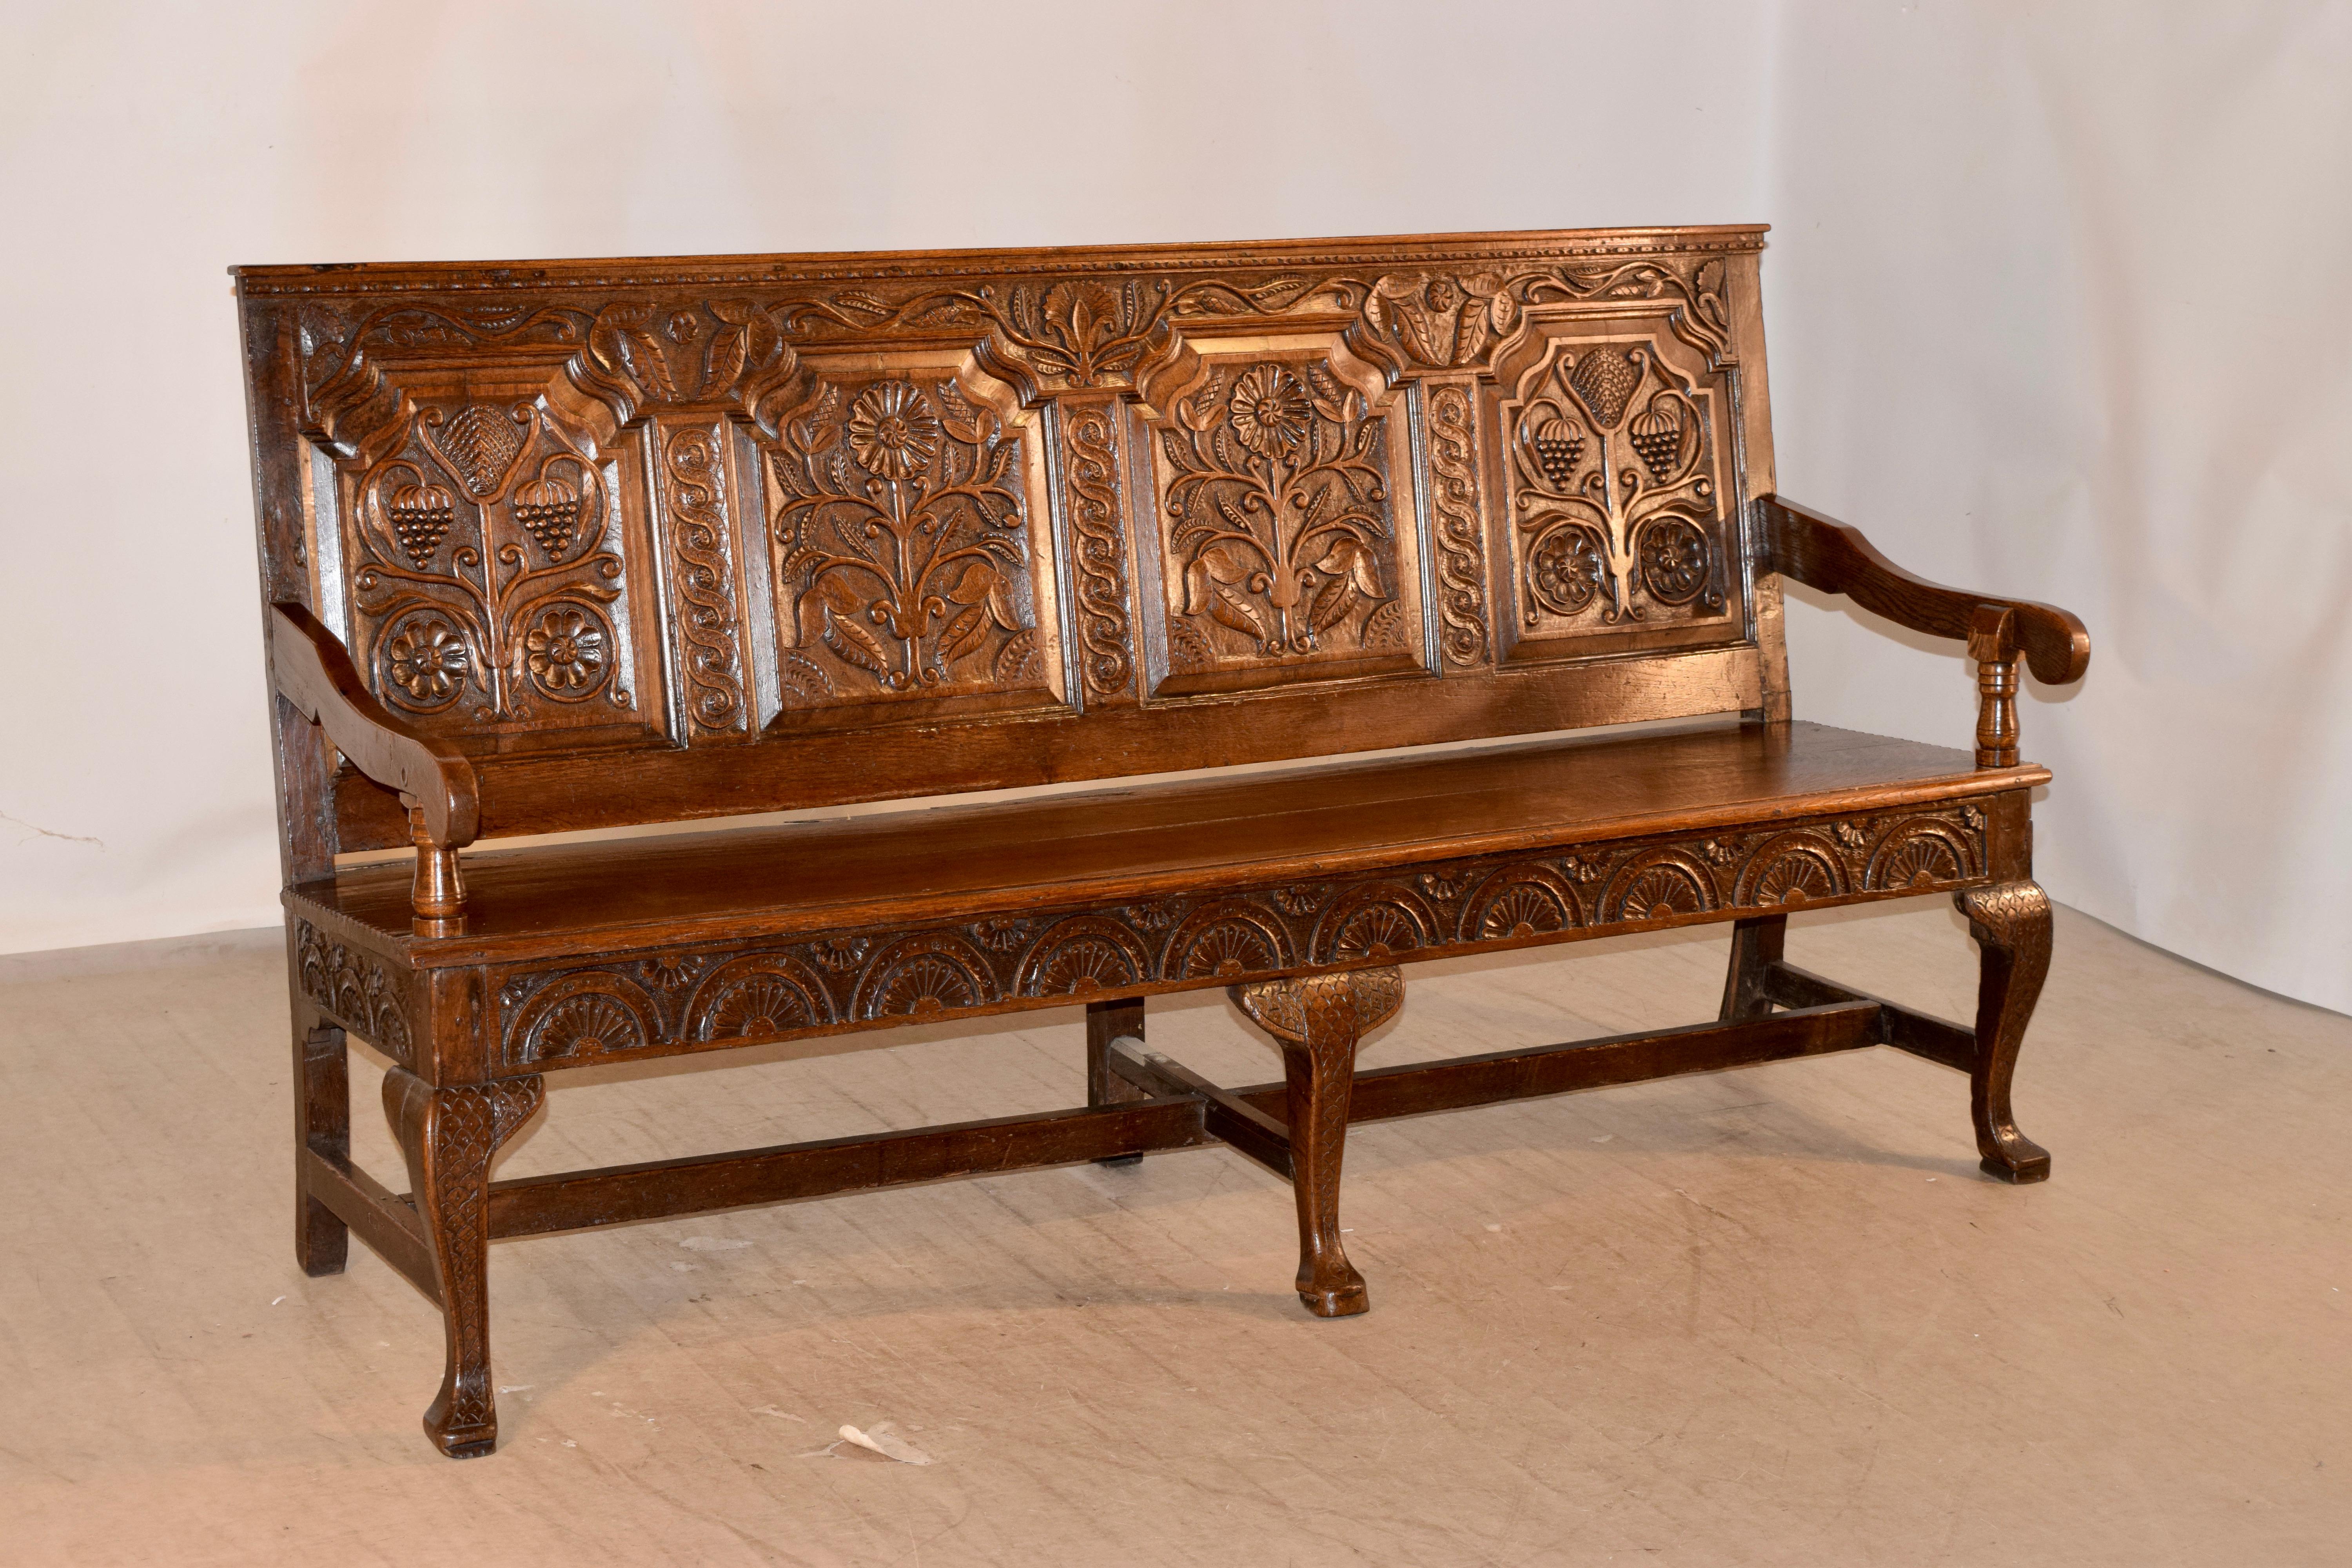 Early 18th century oak bench from England with a highly carved back which has four raised panels, all with floral decoration, flanked with more decorative carvings. The arms are shaped and rest on hand turned supports. The seat is made from two